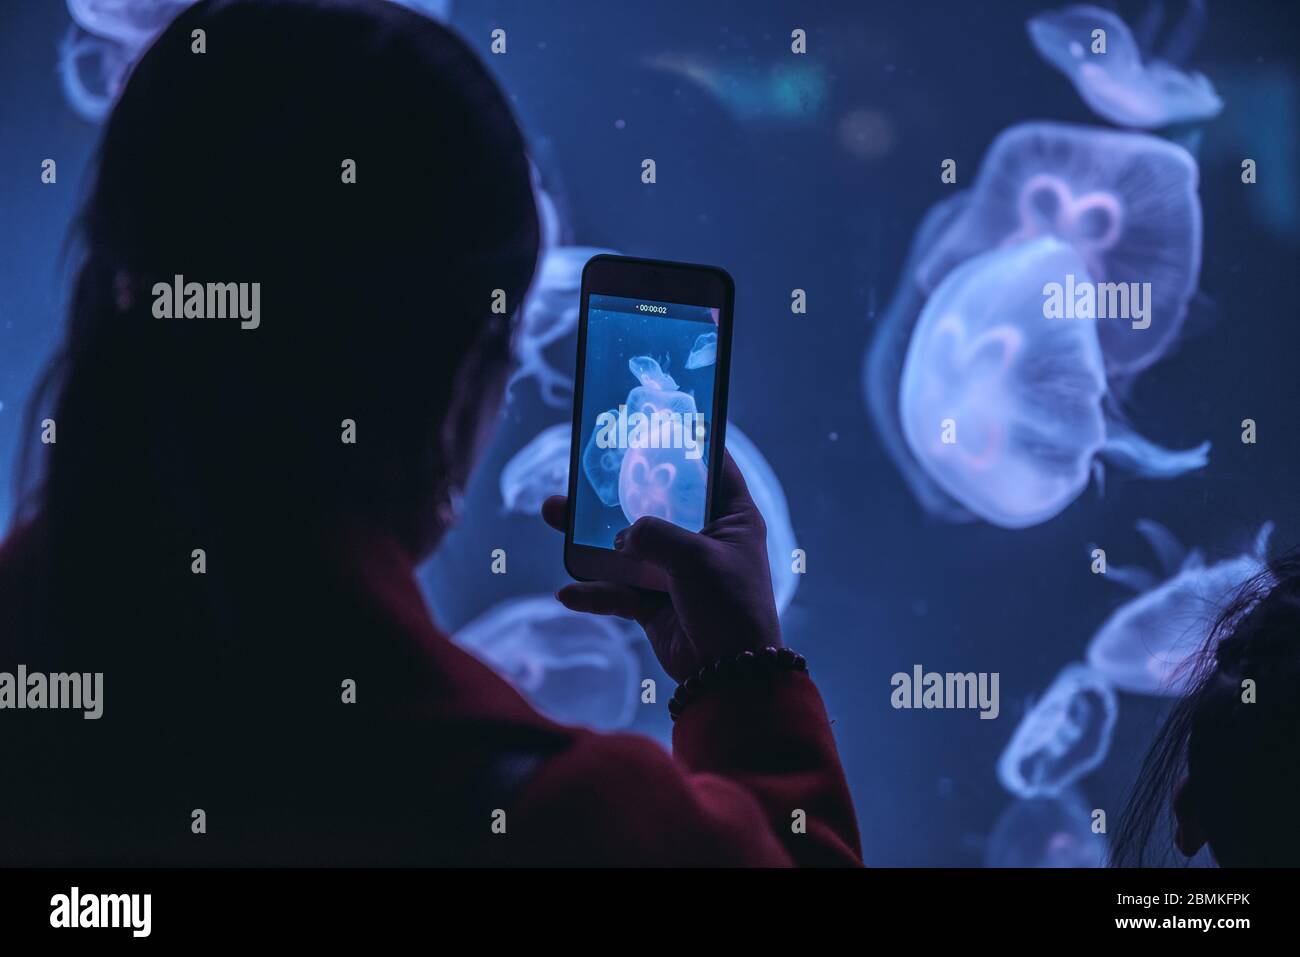 People observing and taking photo of jellyfish with cellphone in the aquarium Stock Photo